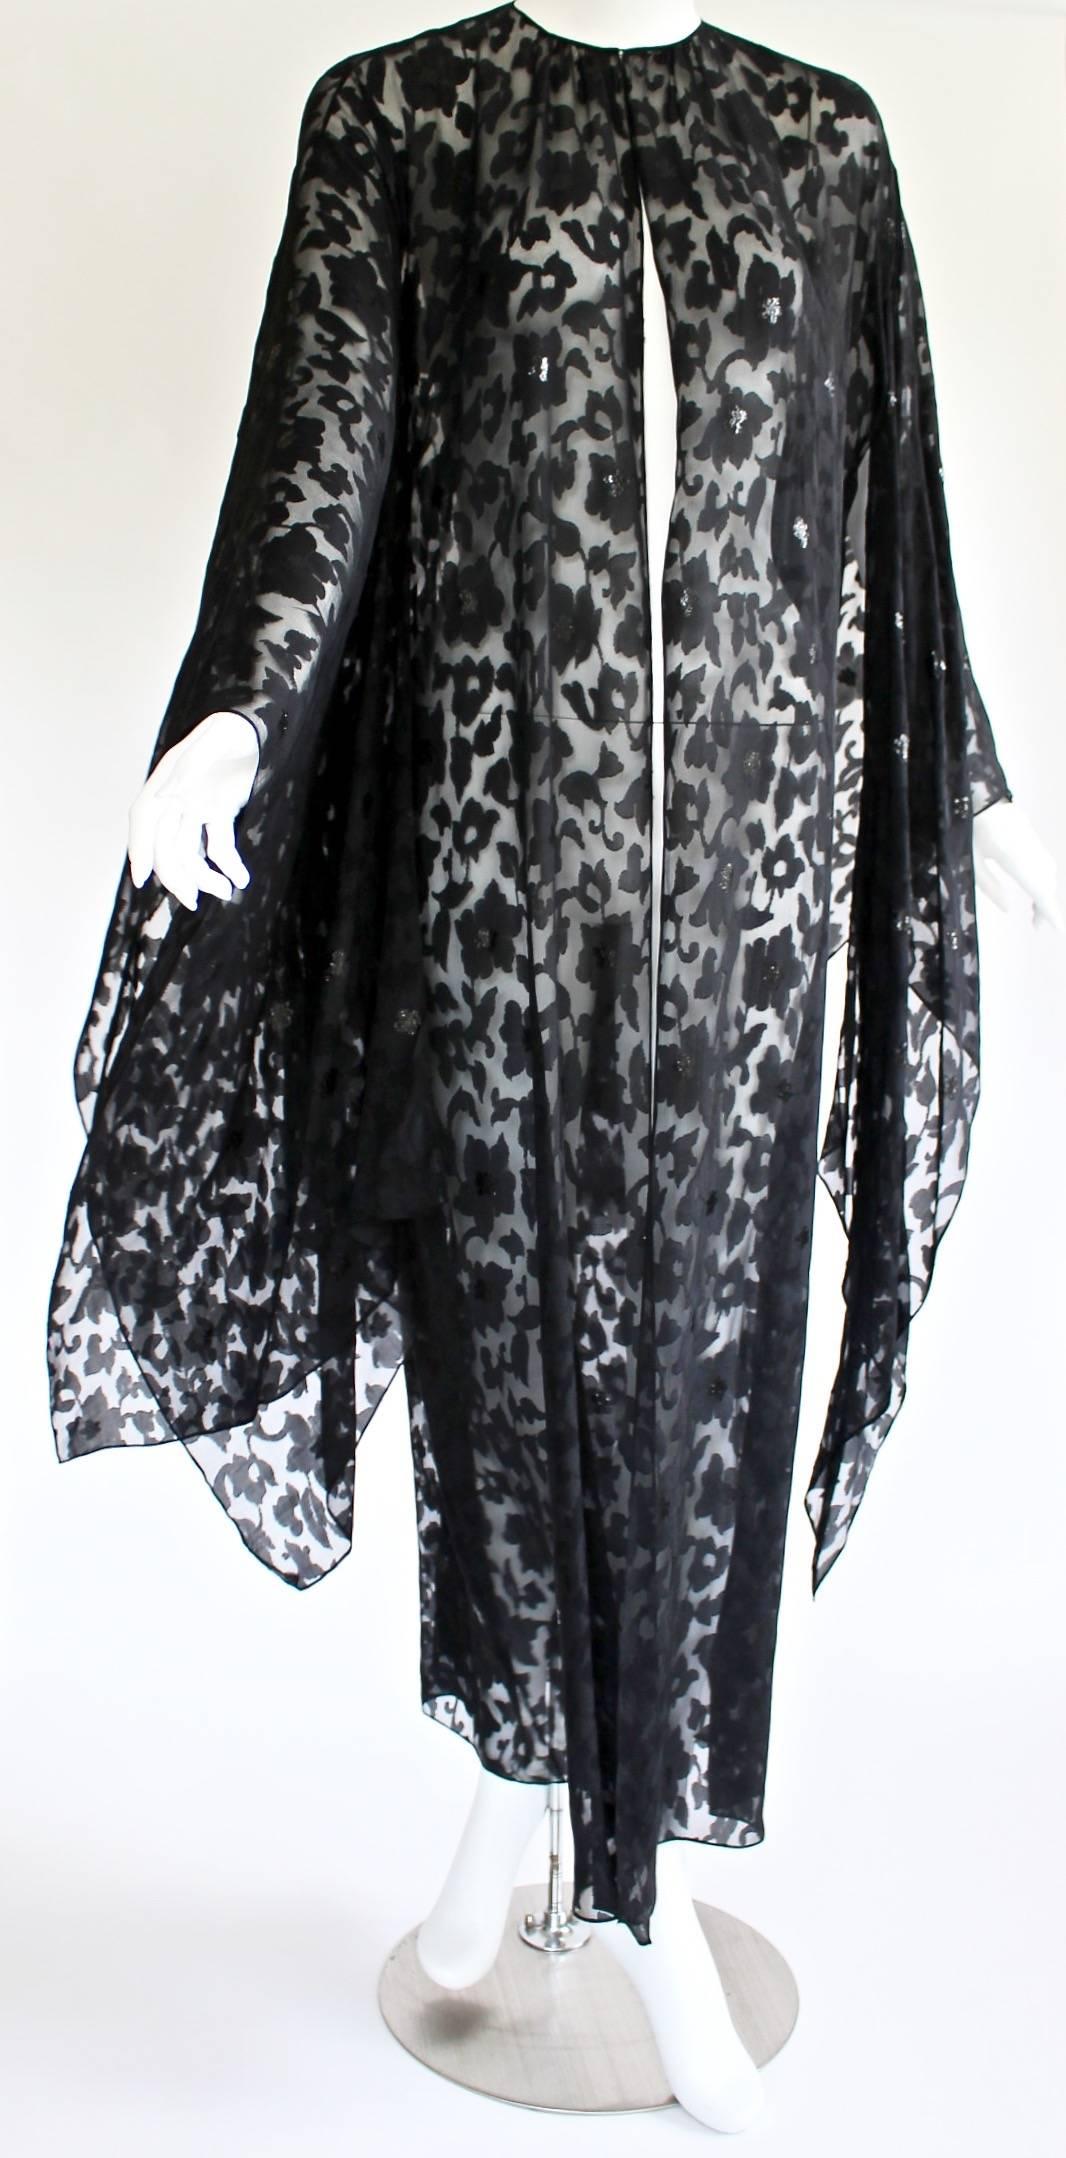 This Nina Ricci kimono is an effortless way to layer on luxury. The diaphanous beauty is designed from light-as-air black silk featuring a devoré print of gorgeous swirling flowers, vines and leaves. Many of the flowers are dressed up with black